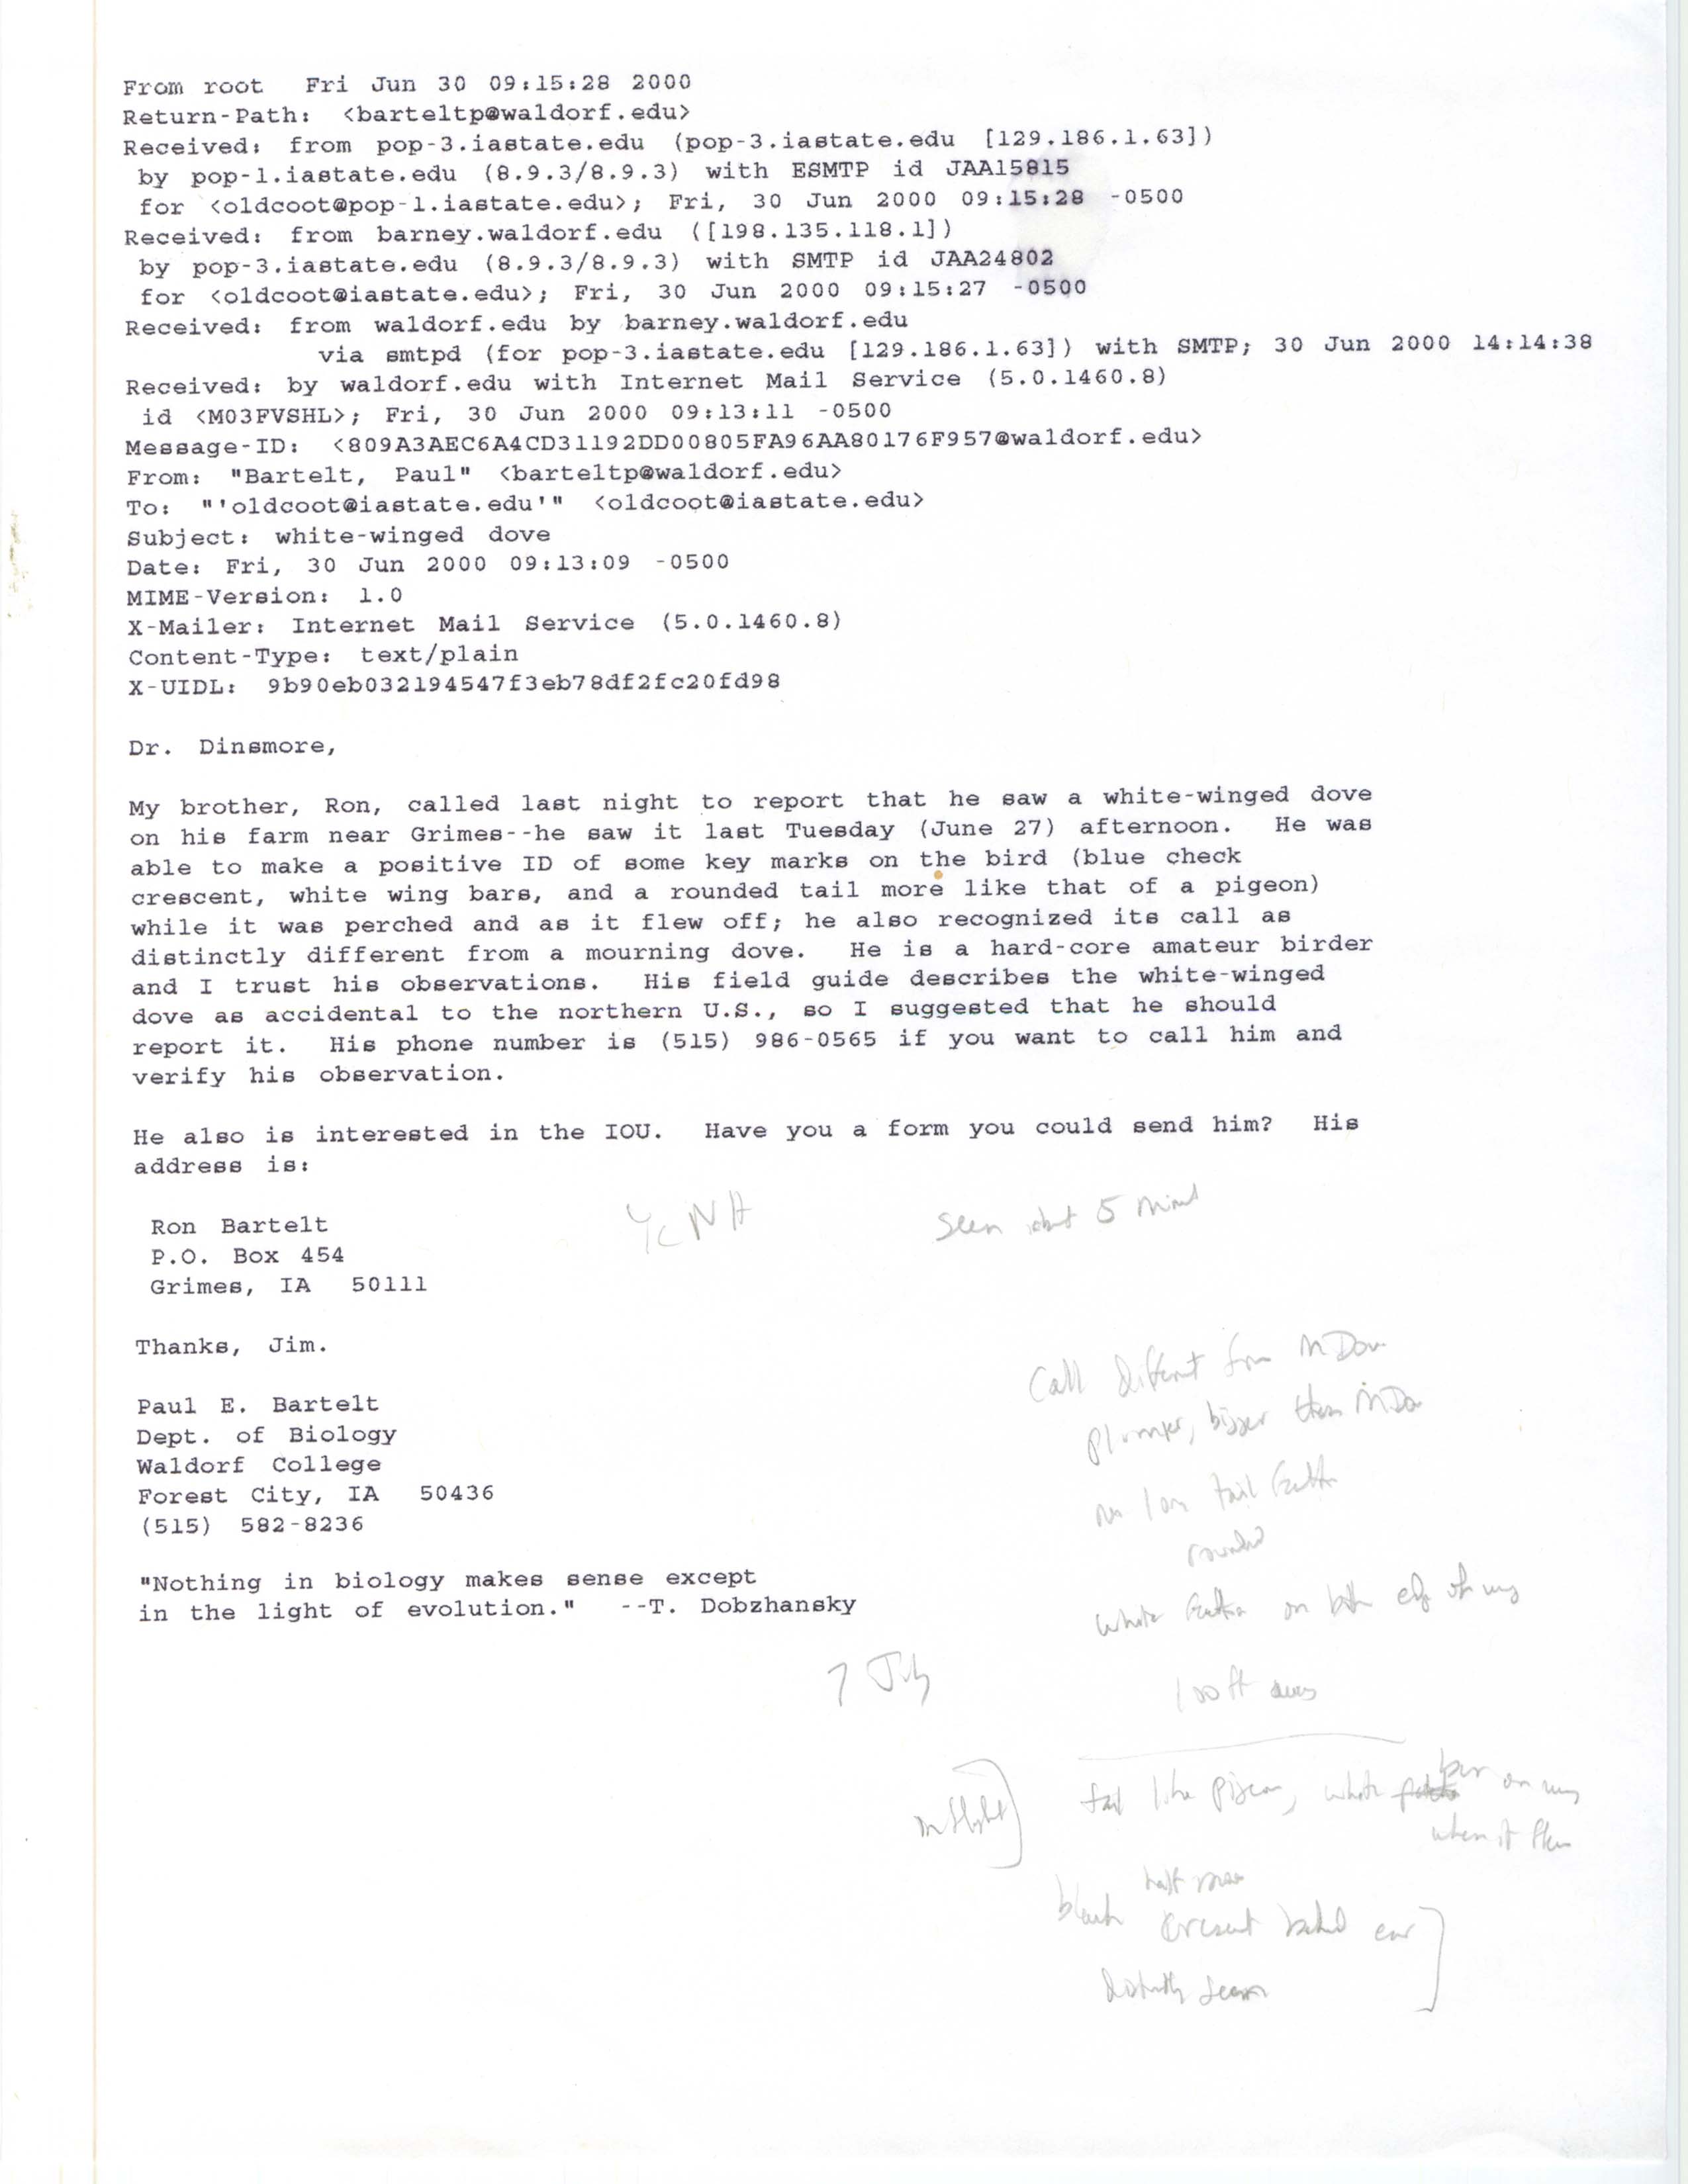 Paul Bartelt email to James J. Dinsmore regarding a White-winged Dove sighting, June 30, 2000